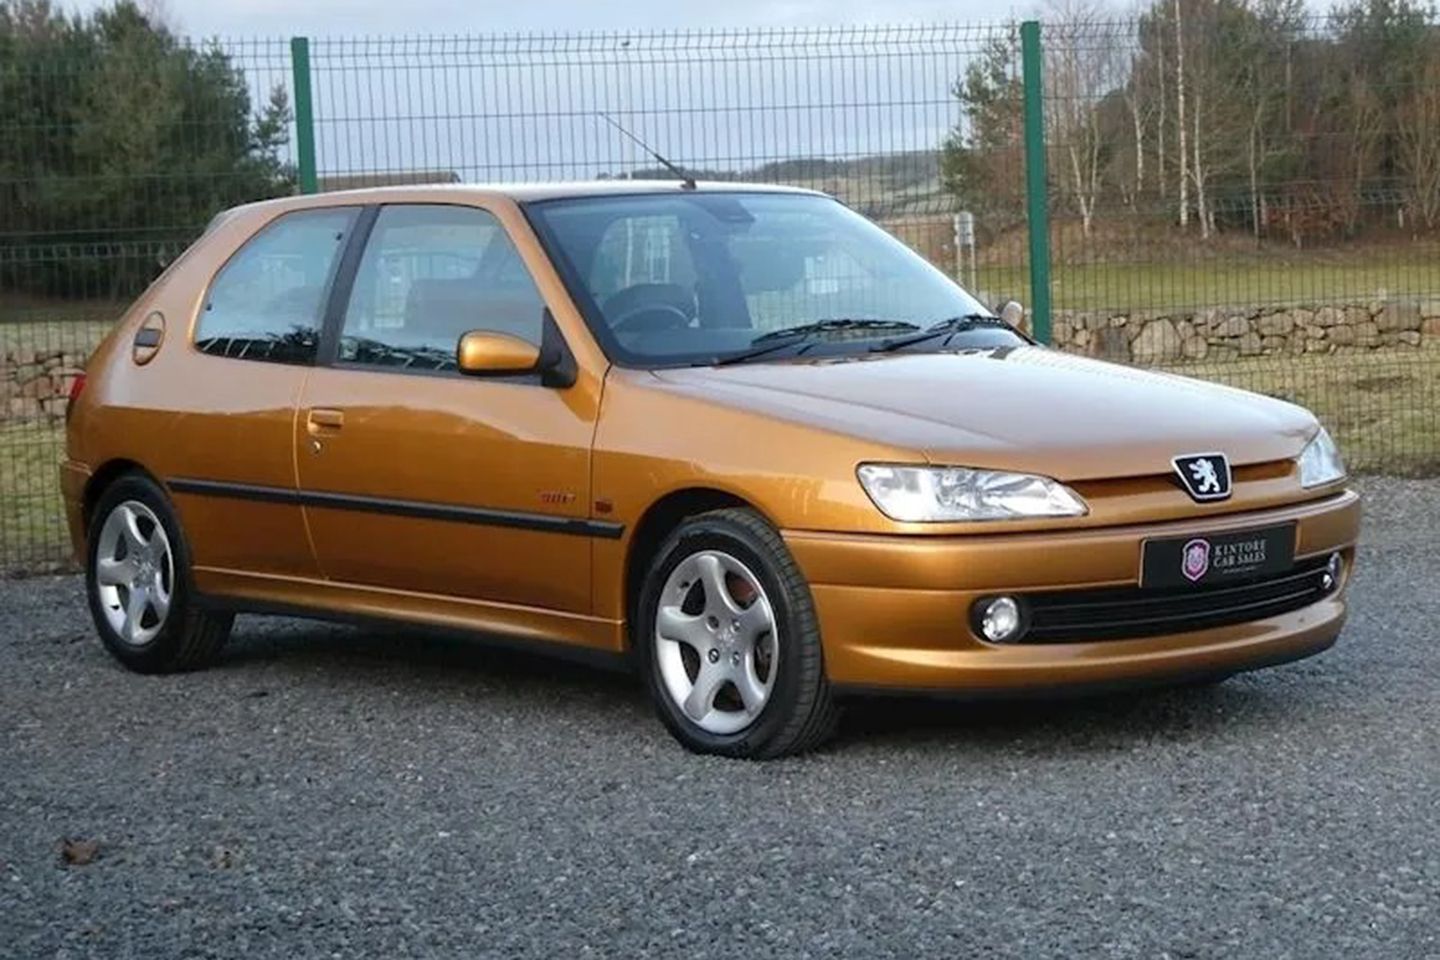 Stunning Photos and Reviews of the Peugeot 306 GTi